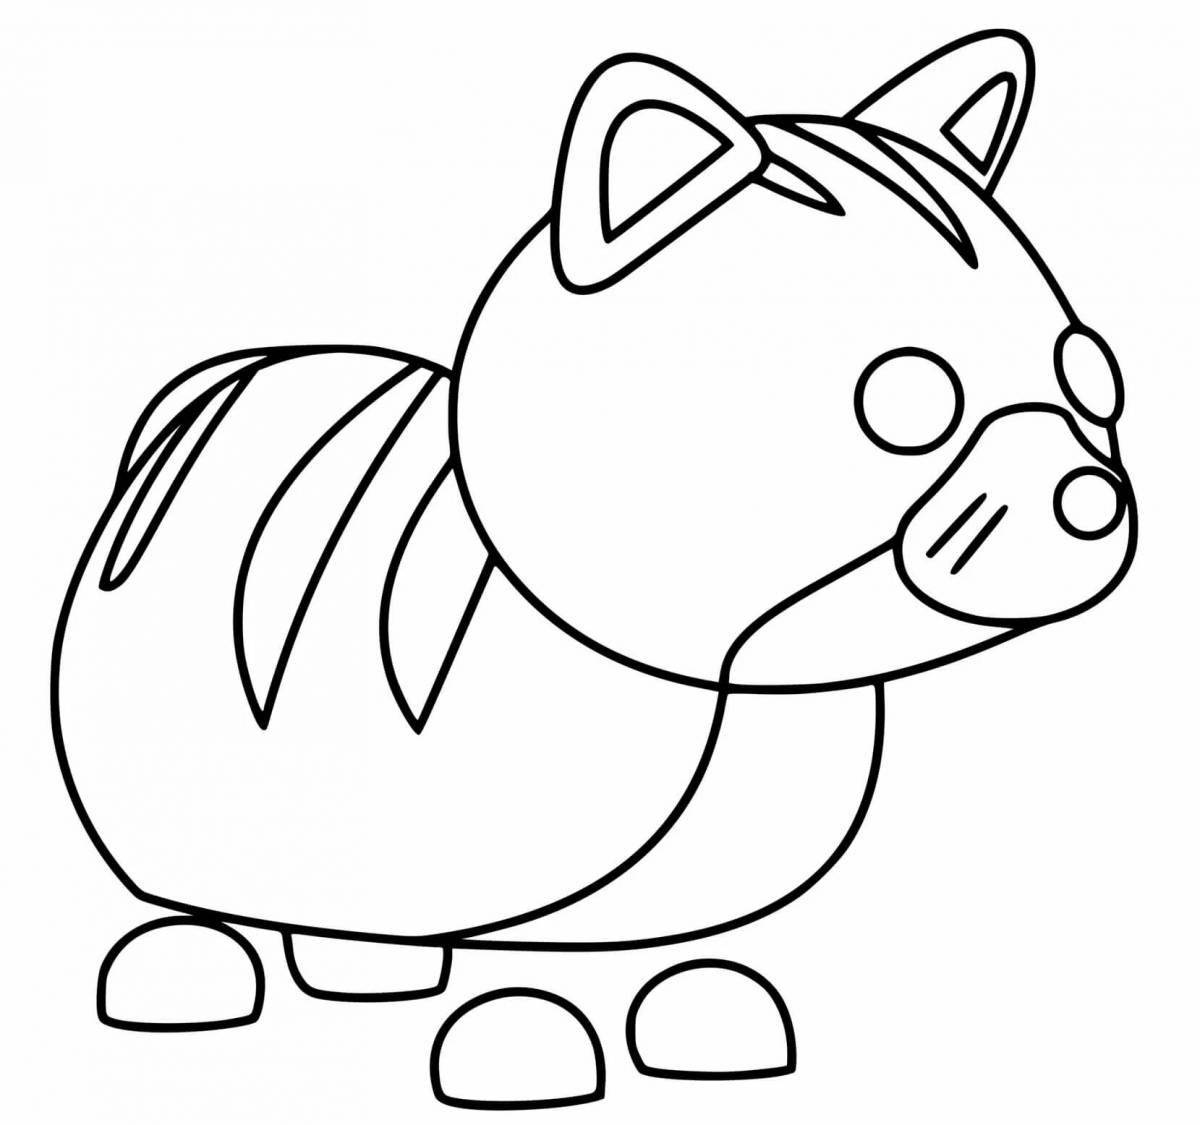 Color-splashed adopt me trade coloring page